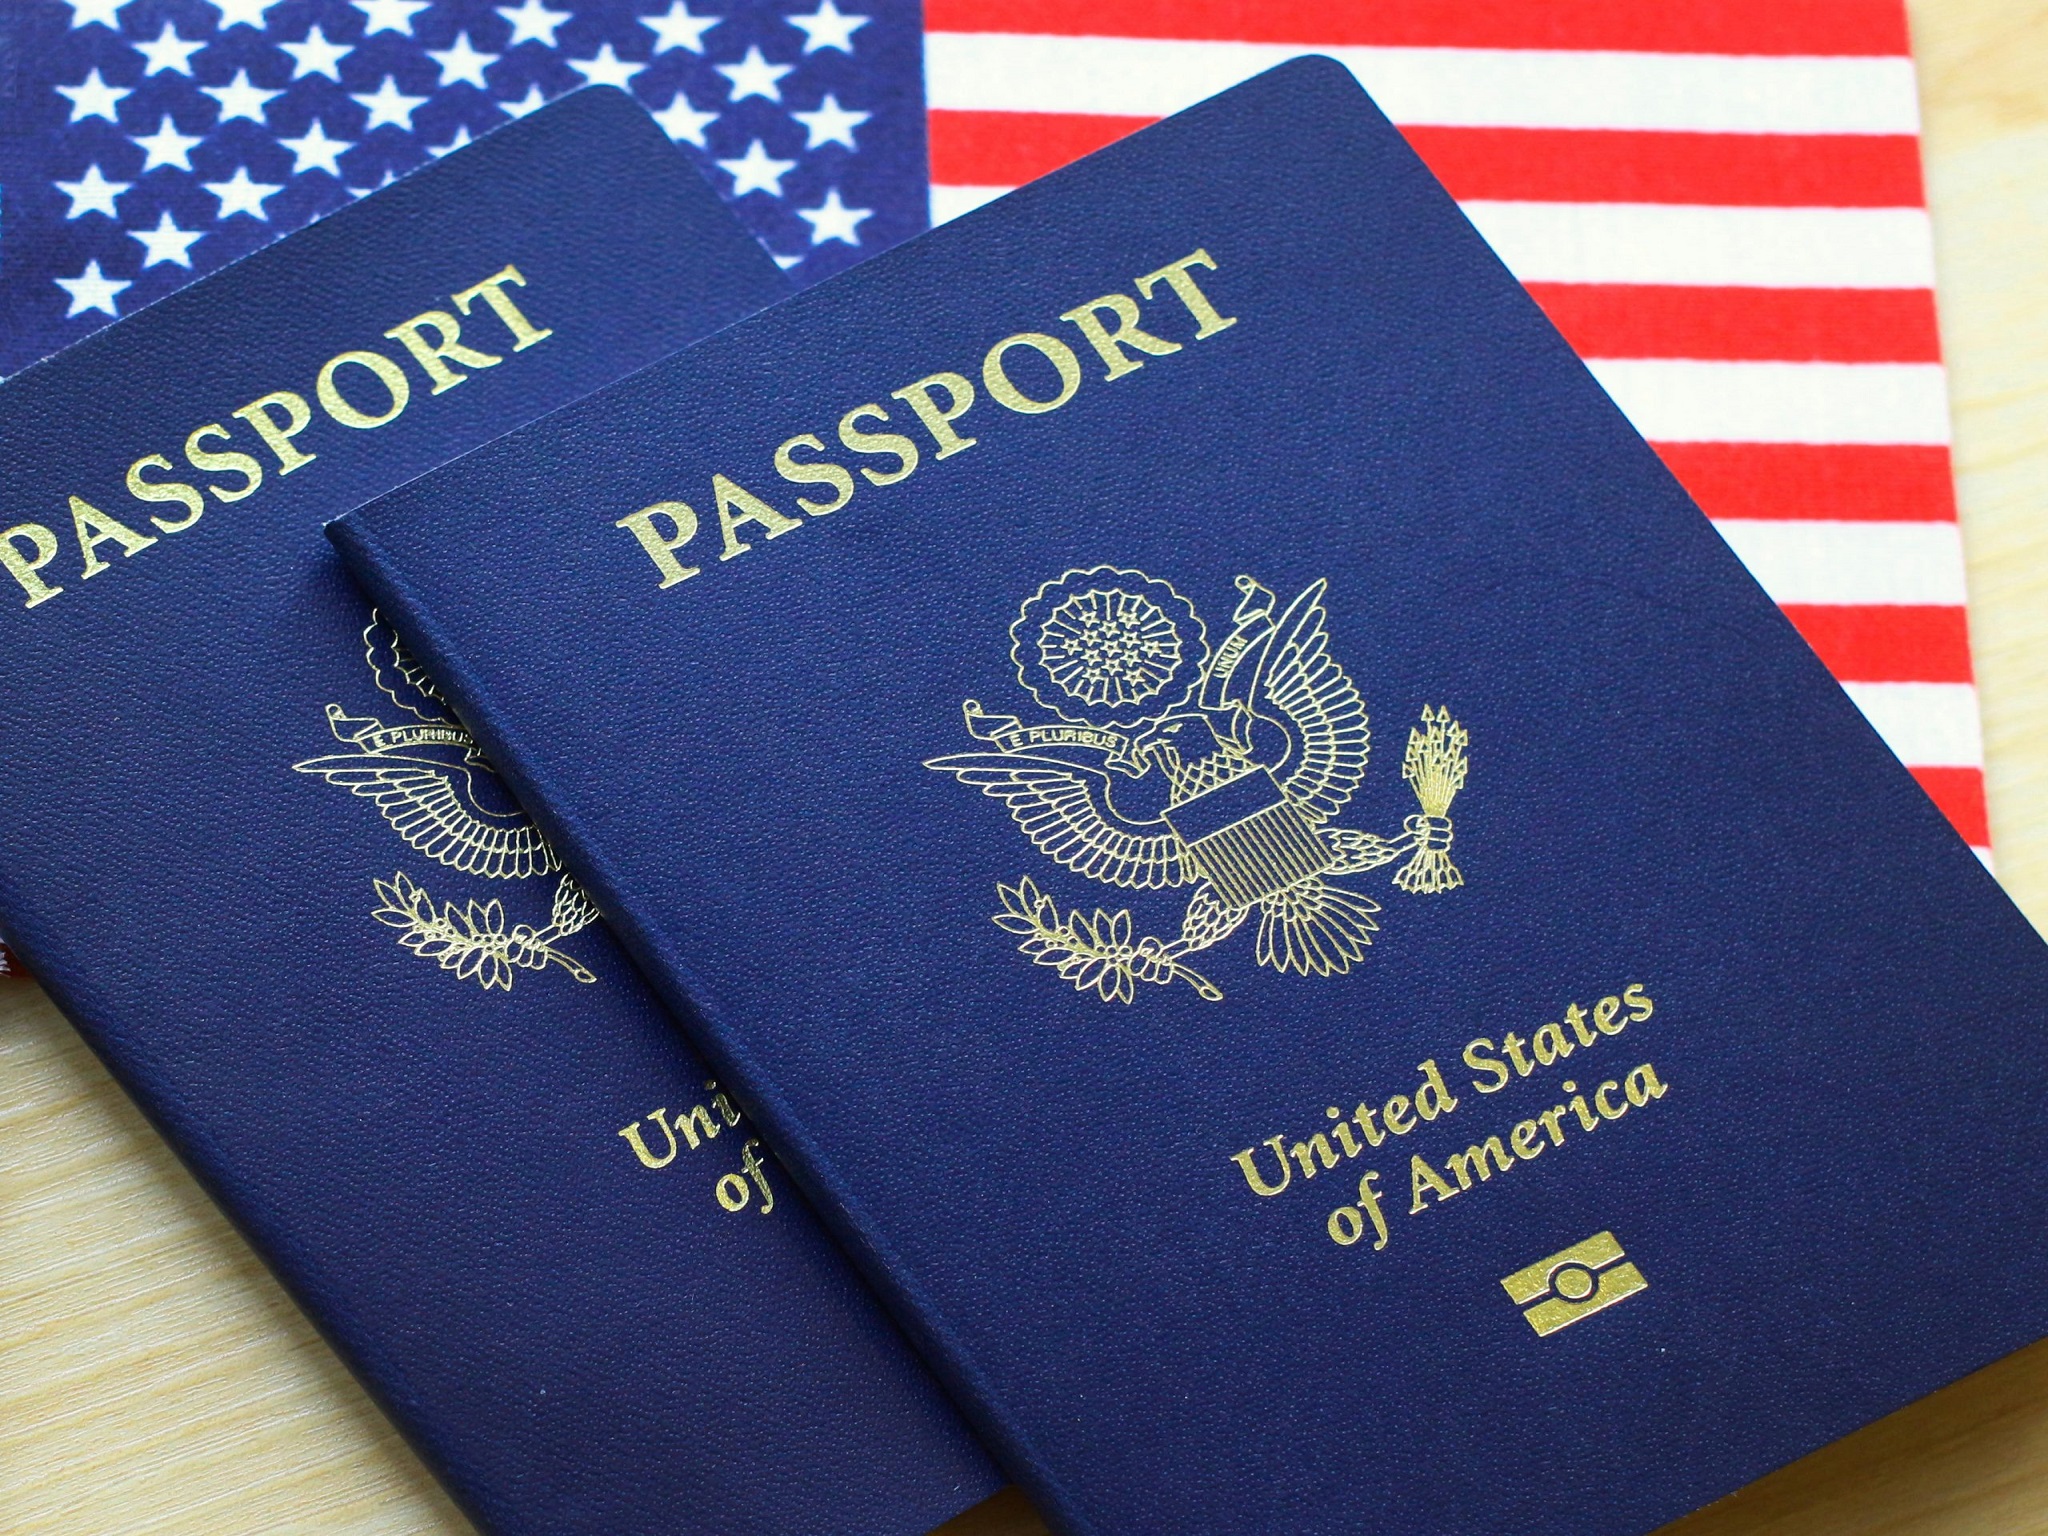 Identification documents - What you should pack to Thailand